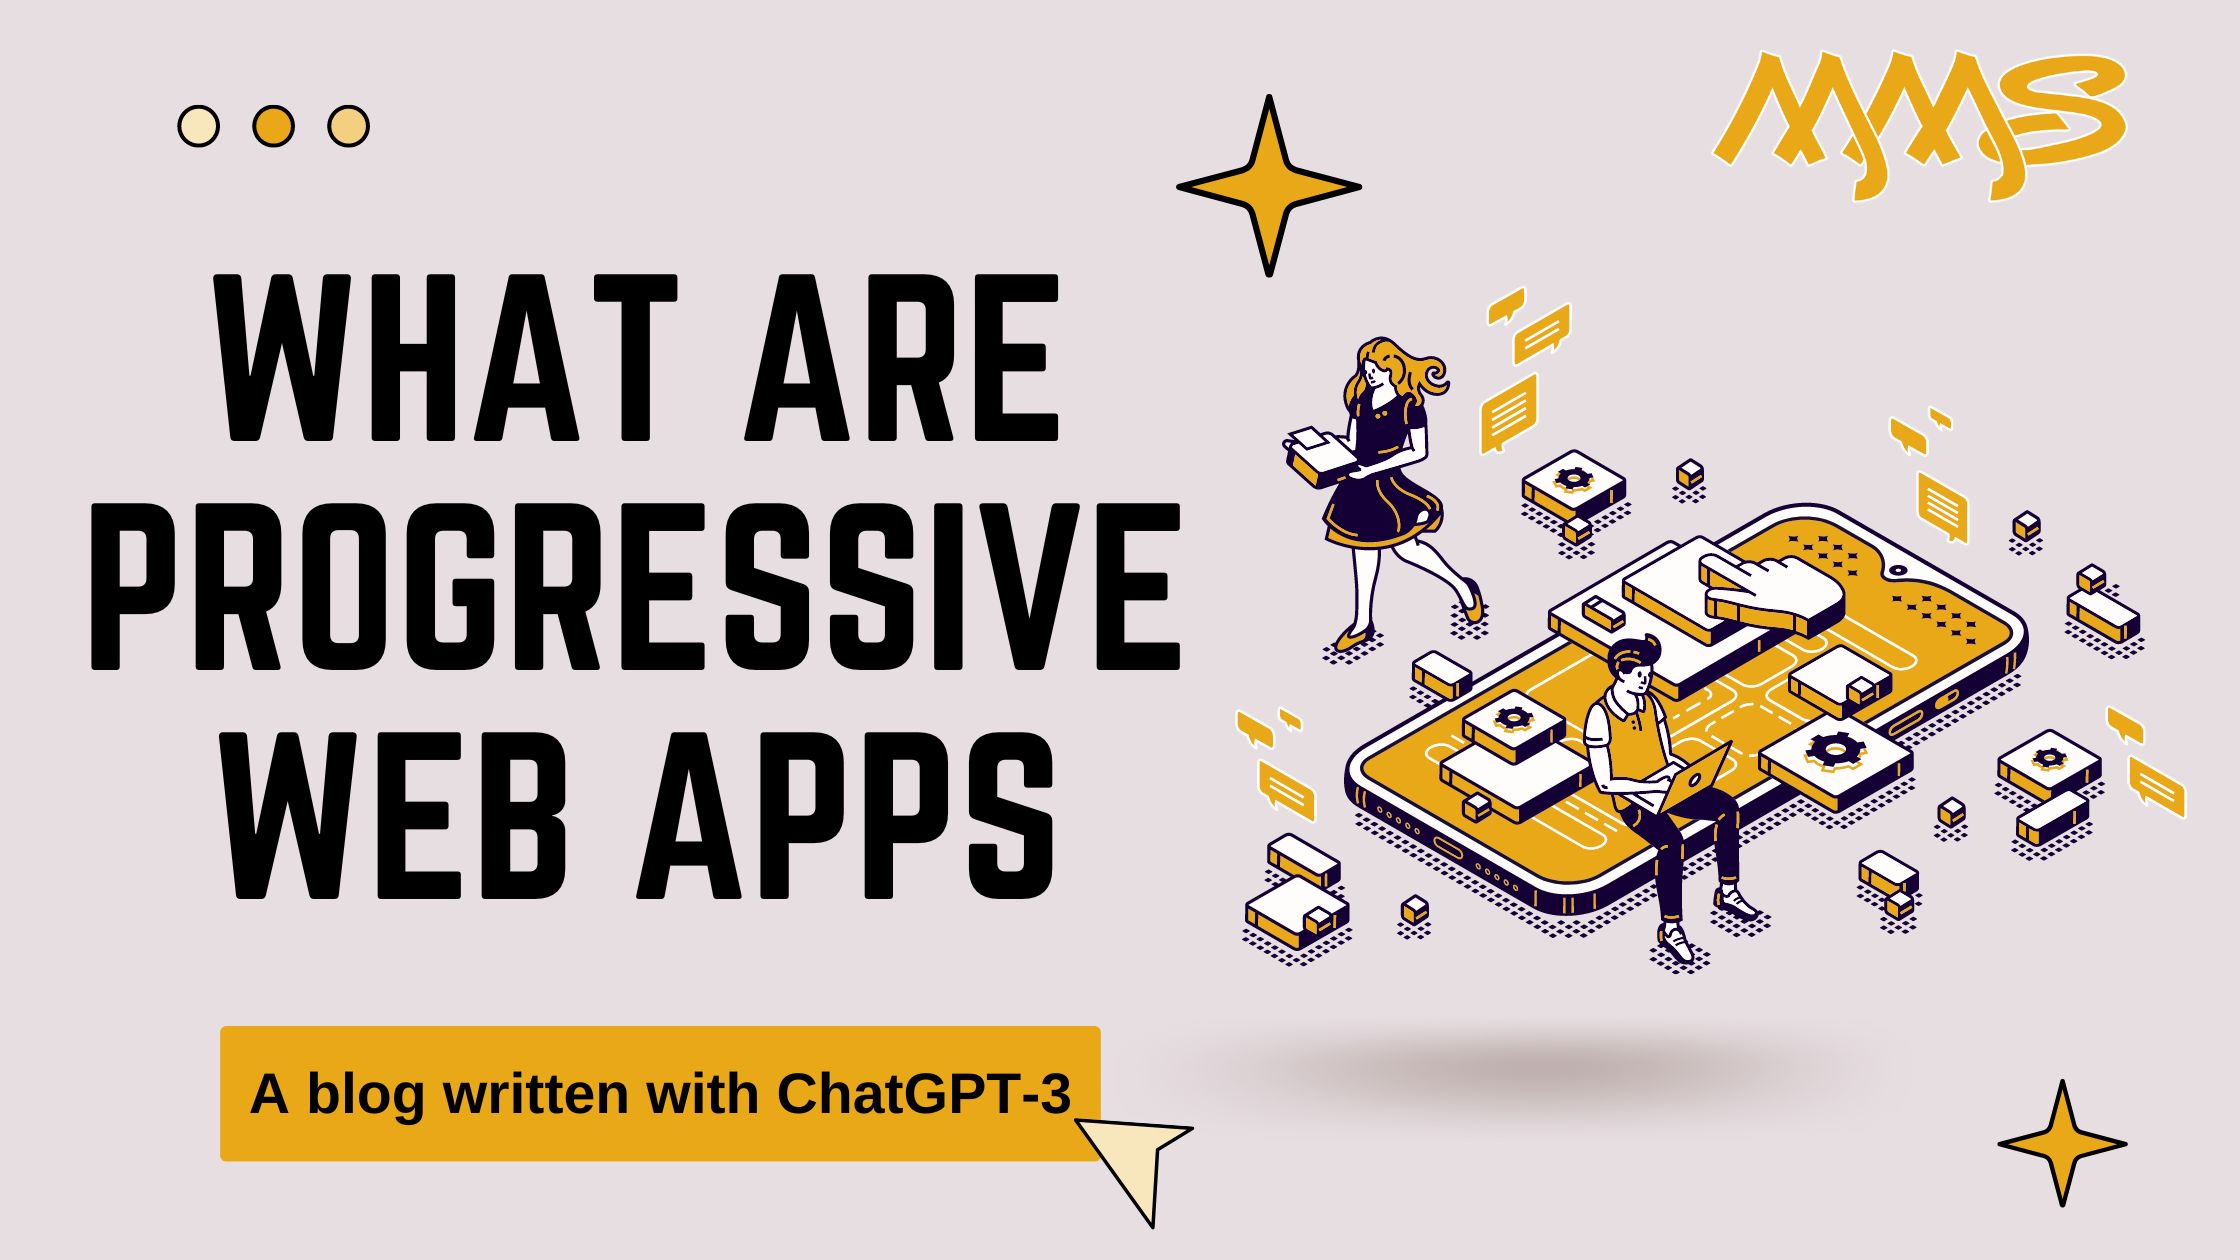 What are Progressive Web Apps? (Written with ChatGPT-3)